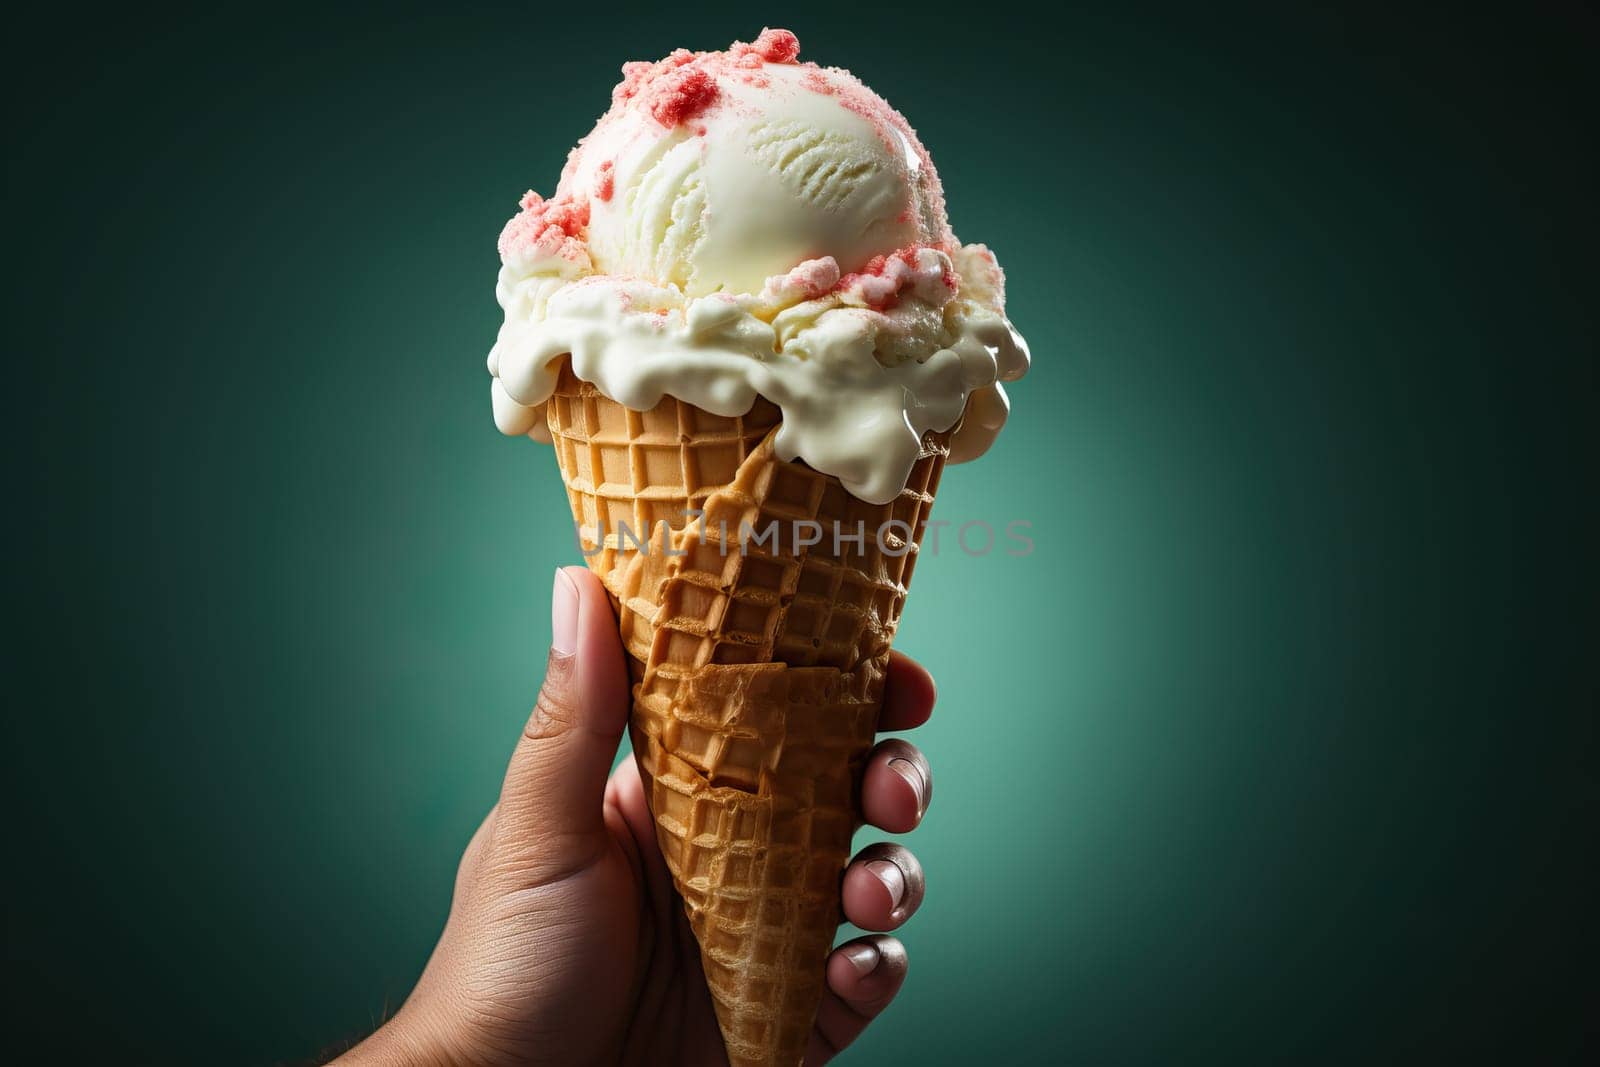 A man holds an ice cream cone in his hand on a green background. by Niko_Cingaryuk